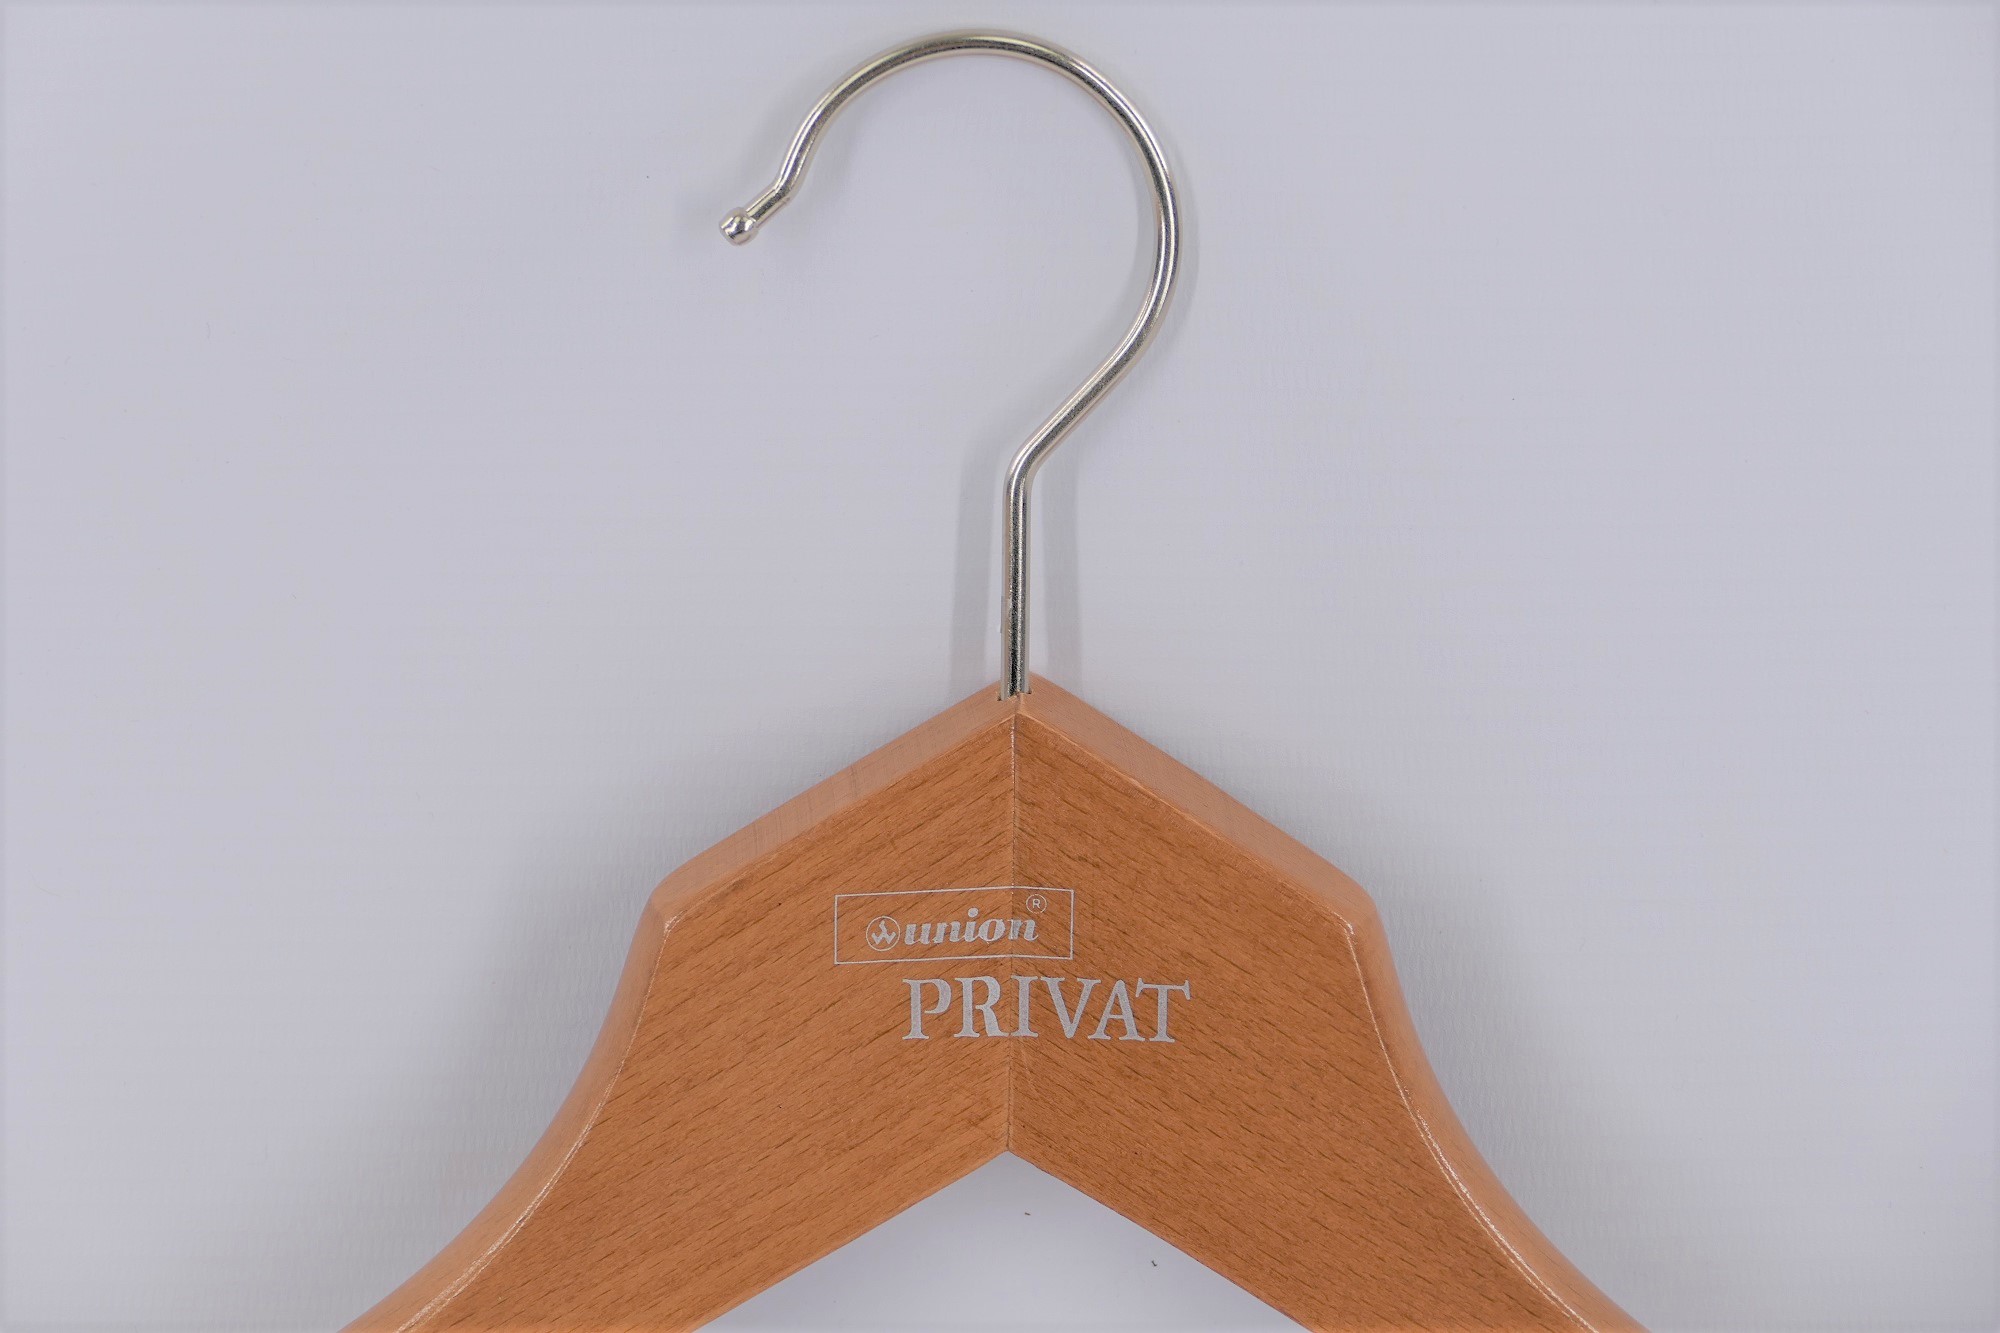 Hanger Privat with bar